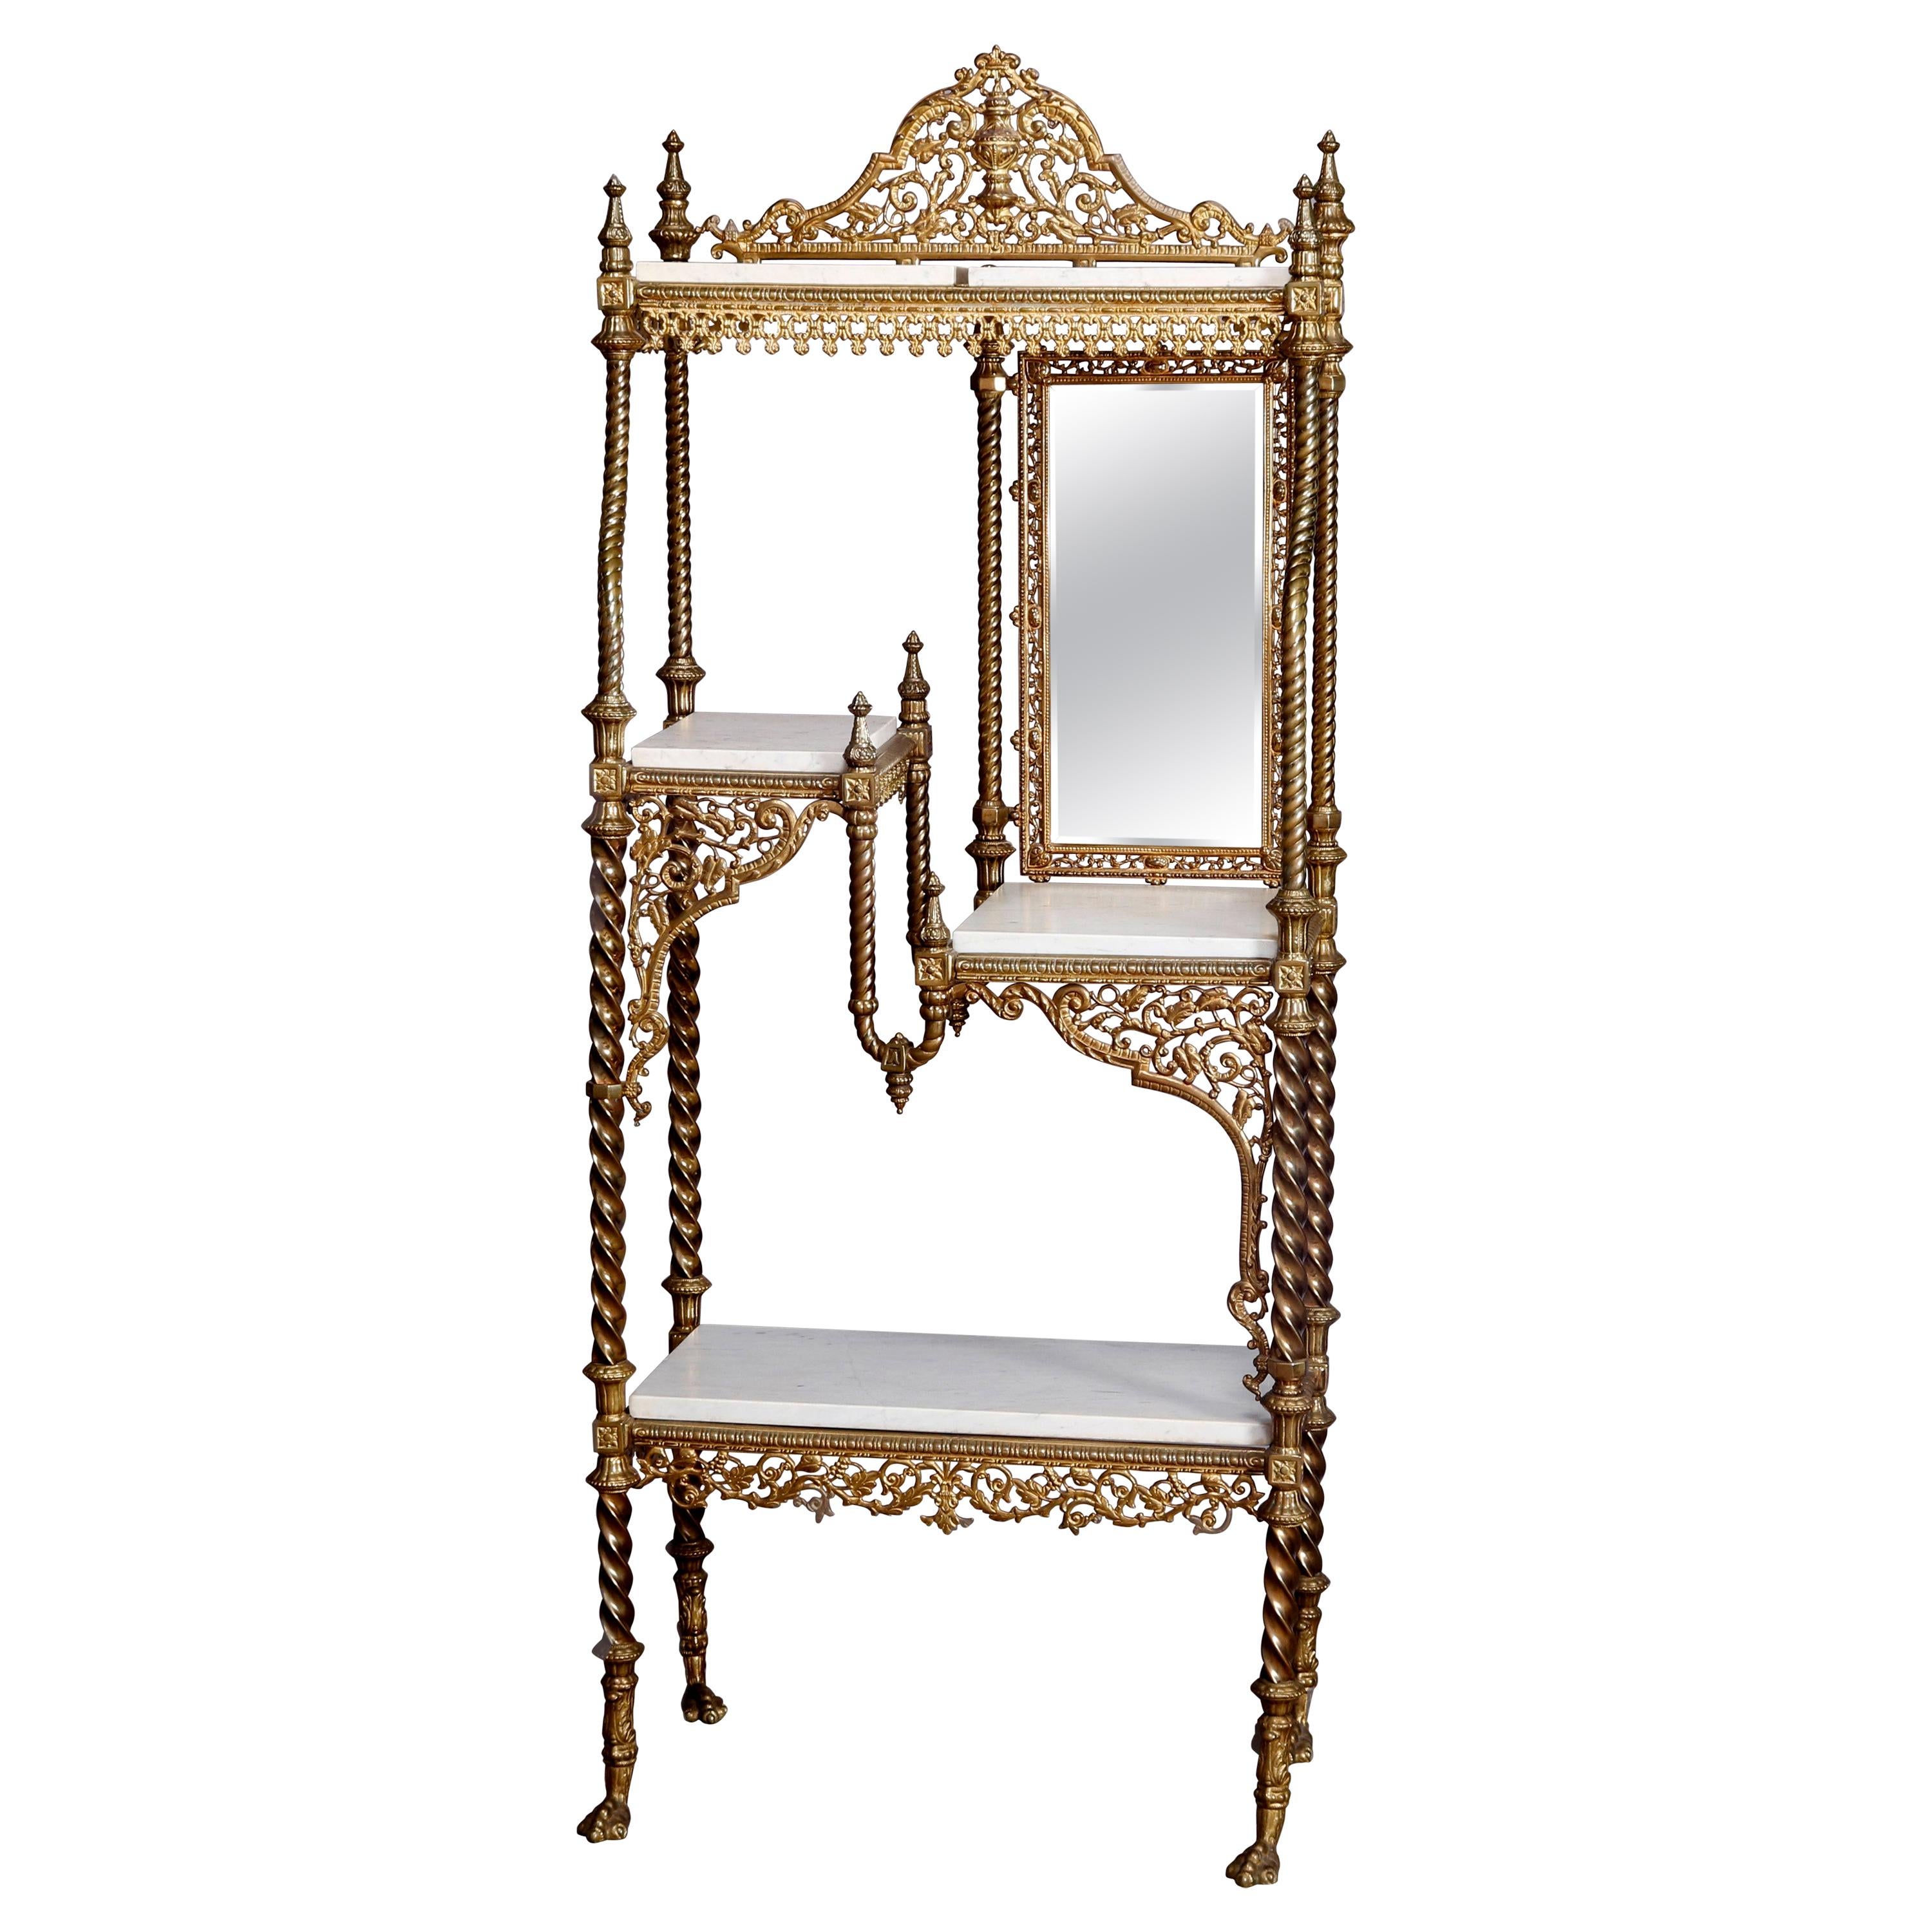 Antique French Louis XVI Style Gilt Bronze and Marble Mirrored Étagère